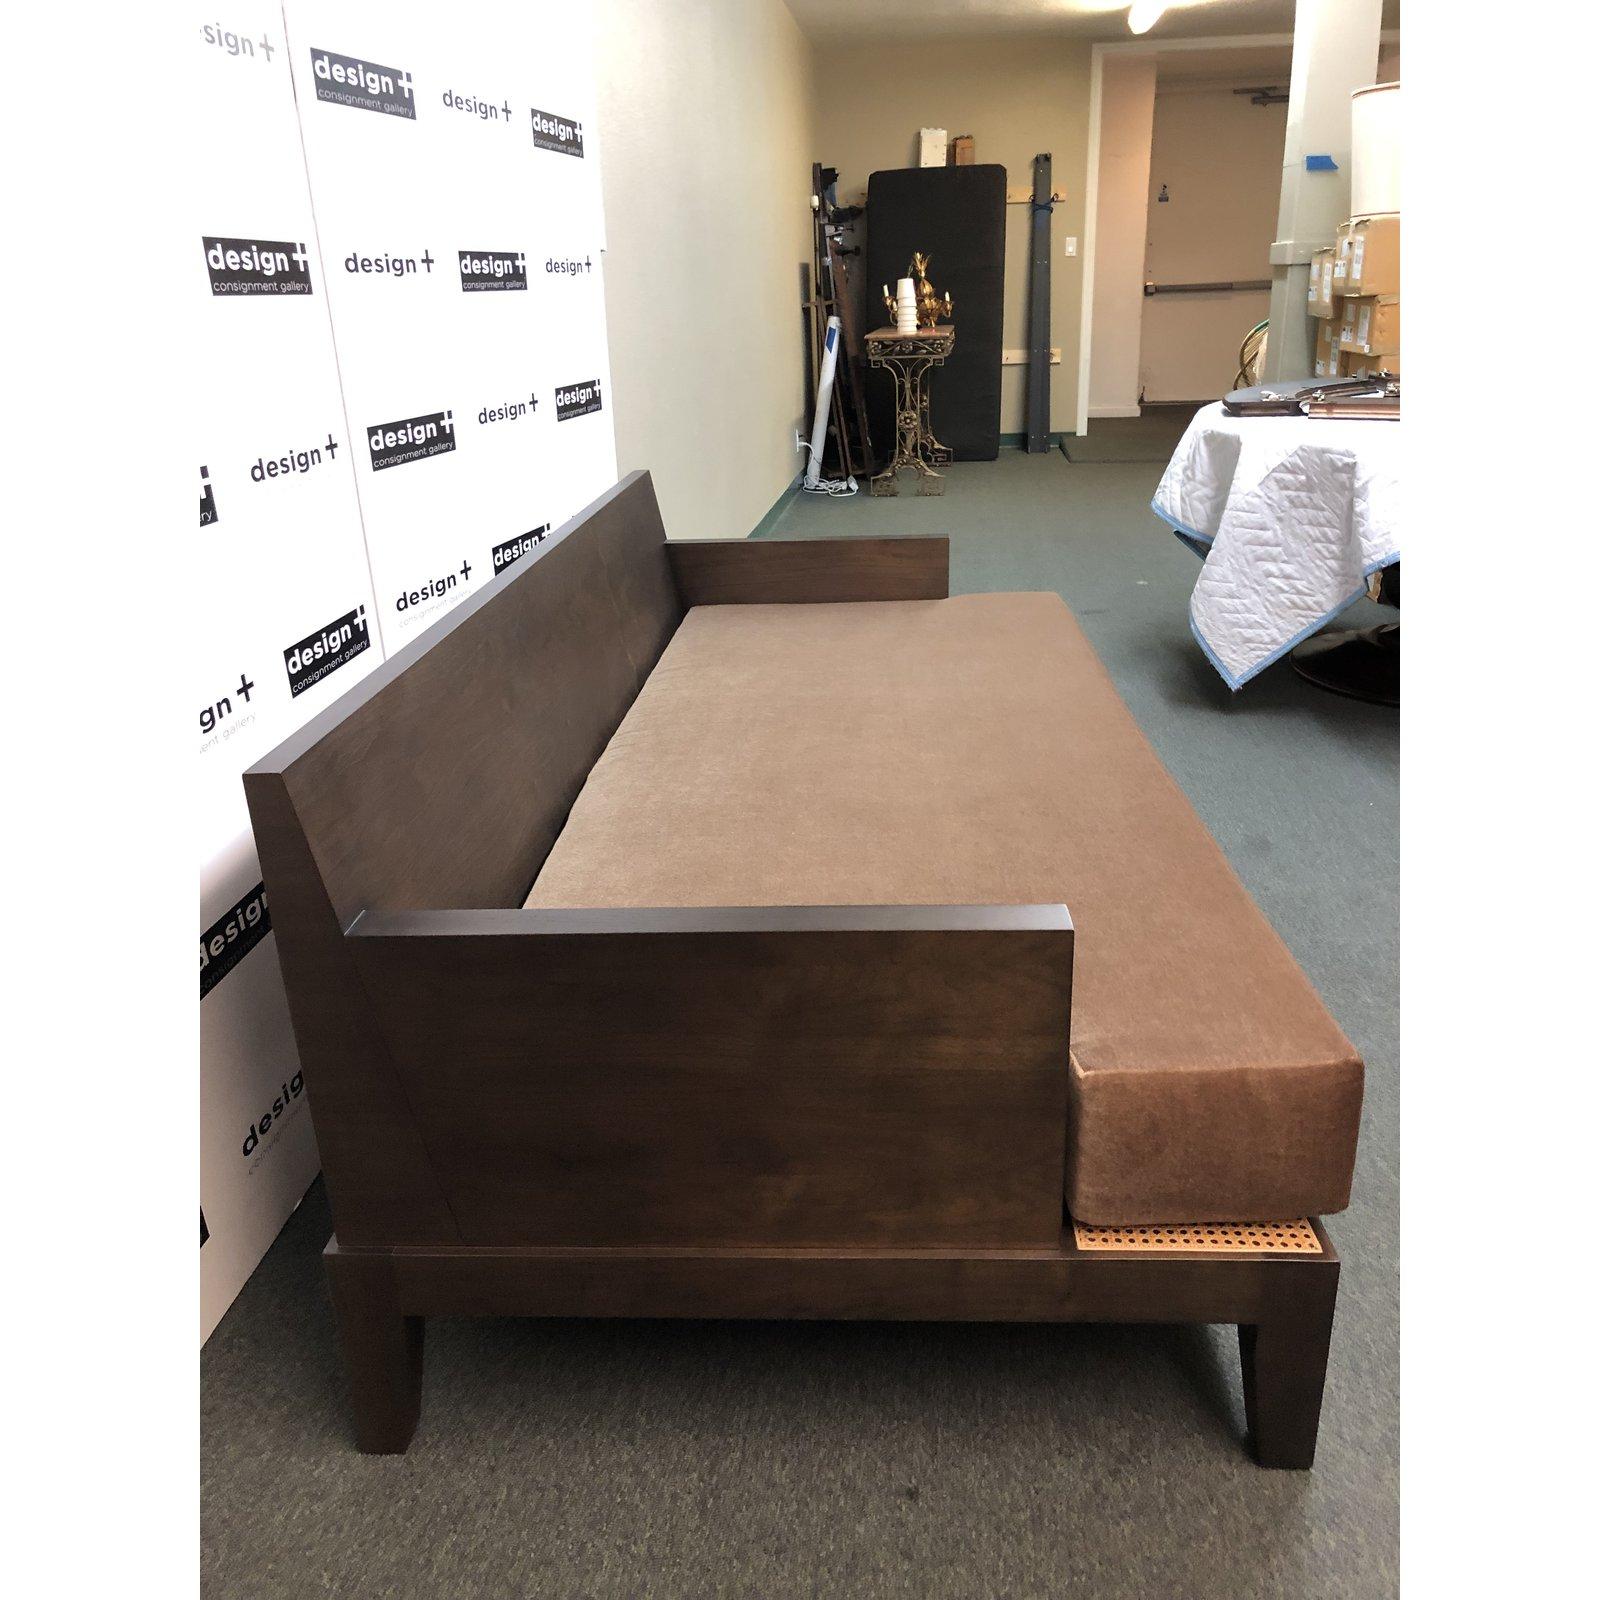 A custom daybed by Bee market. Exquisitely a post heard in Carmel mohair, the espresso stand face features a Contrastingwoven rattan inset. Six coordinating down filled decor pillows are included, as shown.